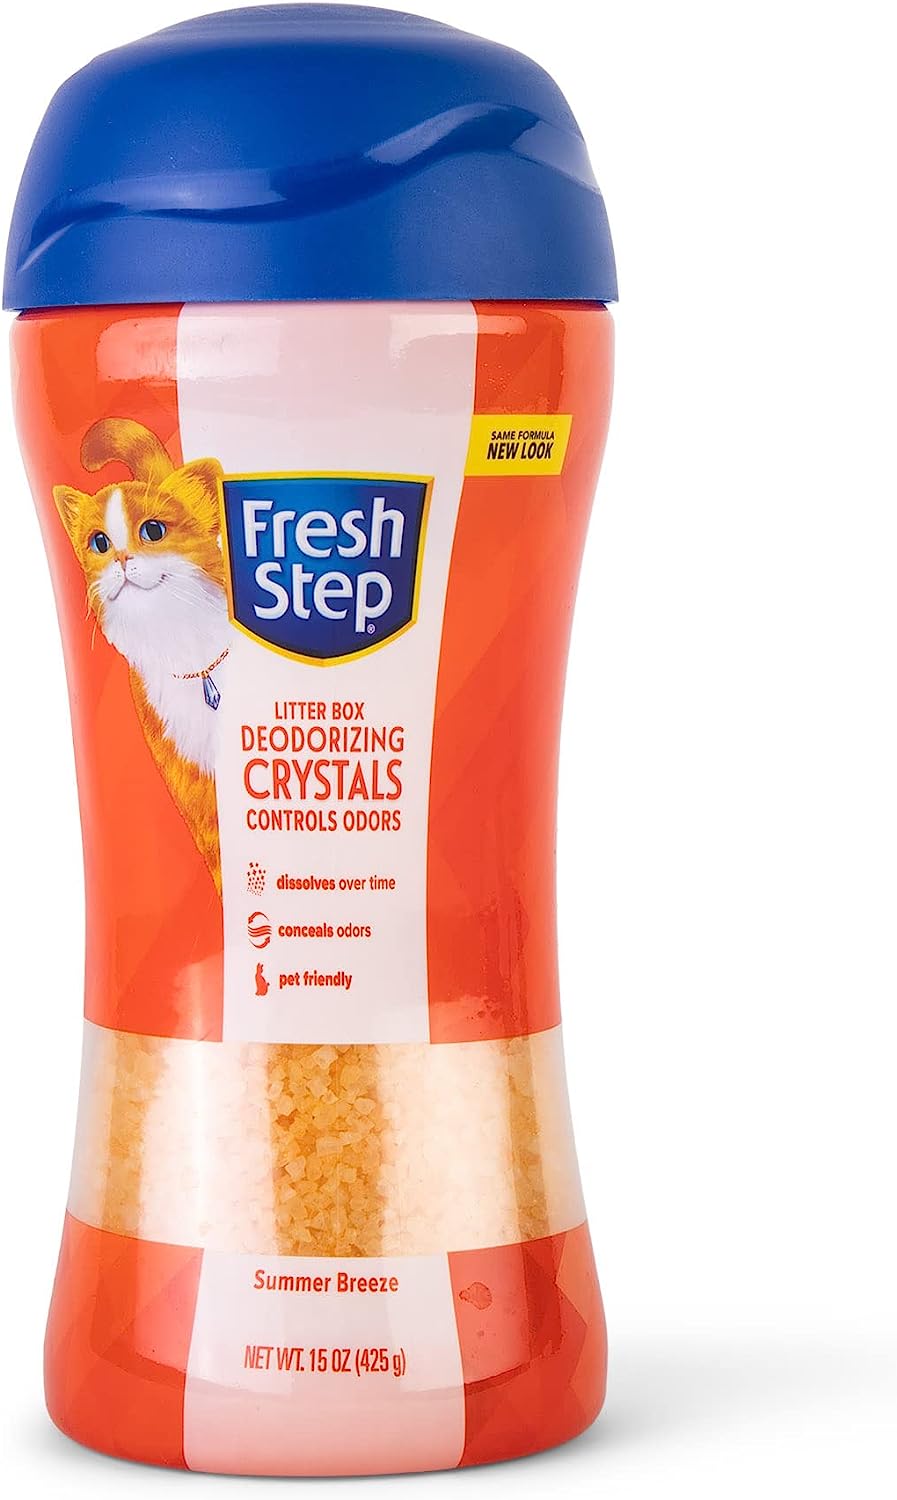 Fresh Step Cat Litter Crystals In summer Breeze Scent [...]